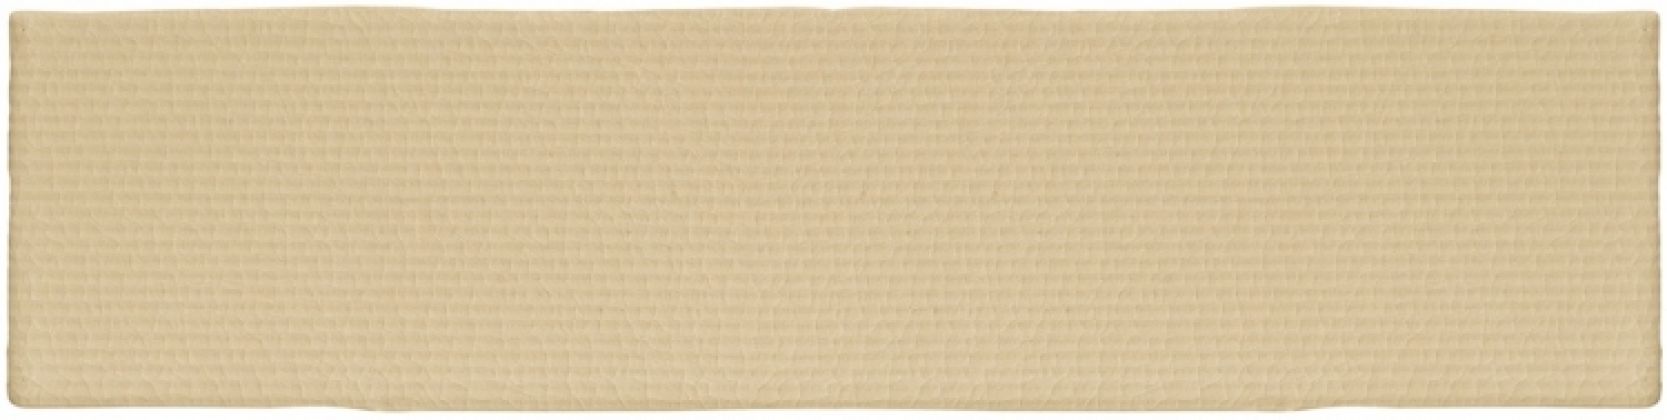 Liso Textured Fawn 30x7,5 ADEH1010